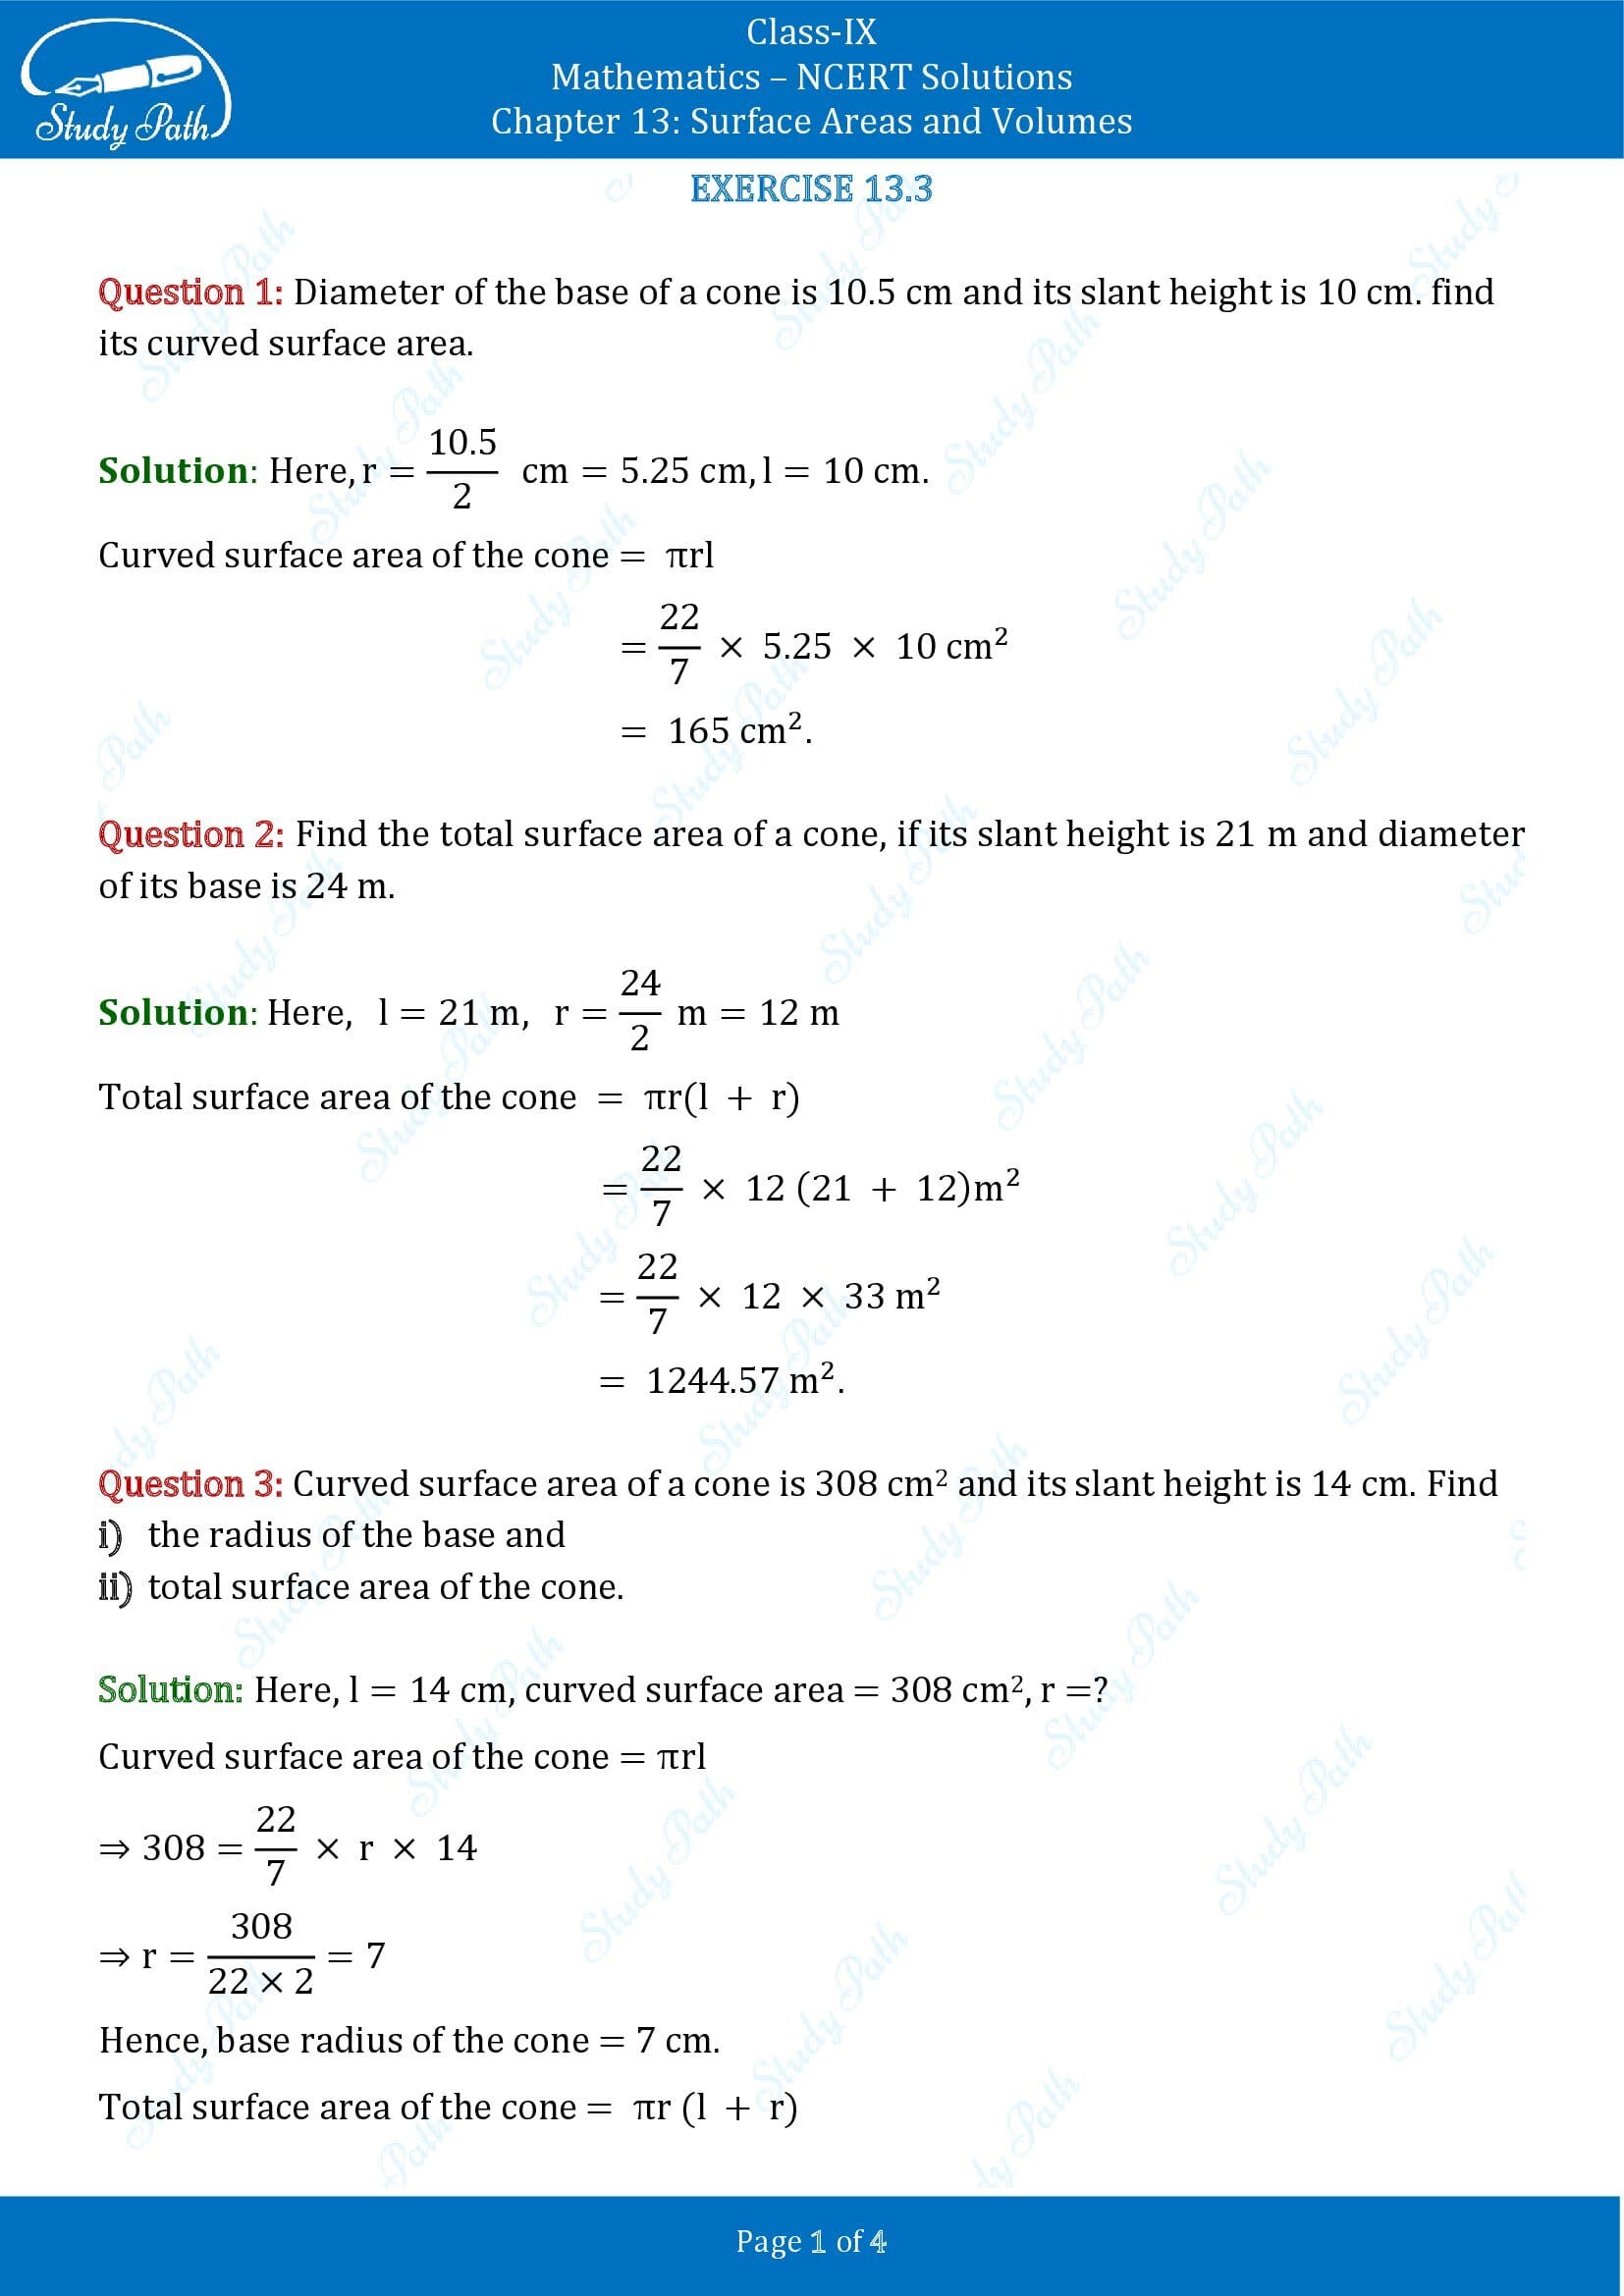 NCERT Solutions for Class 9 Maths Chapter 13 Surface Areas and Volumes Exercise 13.3 00001